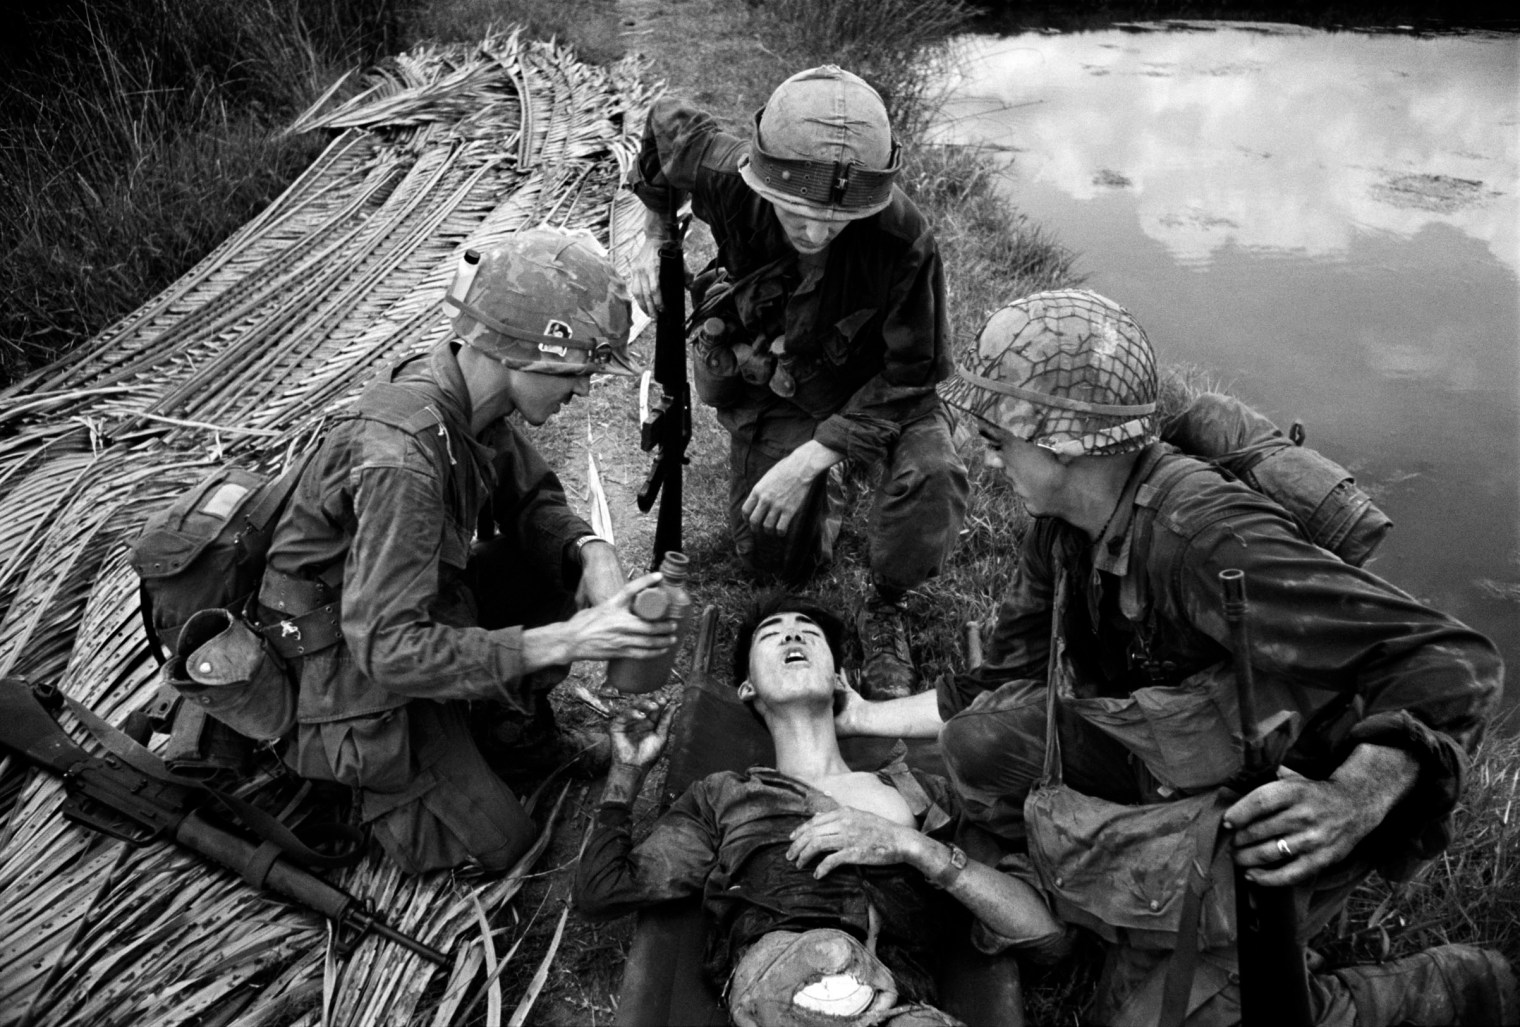 VIETNAM. The battle for Saigon. American G.I's often showed compassion toward the Vietcong. This sprang from a soldierly admiration for their dedication and bravery; qualities difficult to discern in the average government soldier. This VC had fought for three days with his intestines in a cooking bowl strapped onto his stomach. 1968